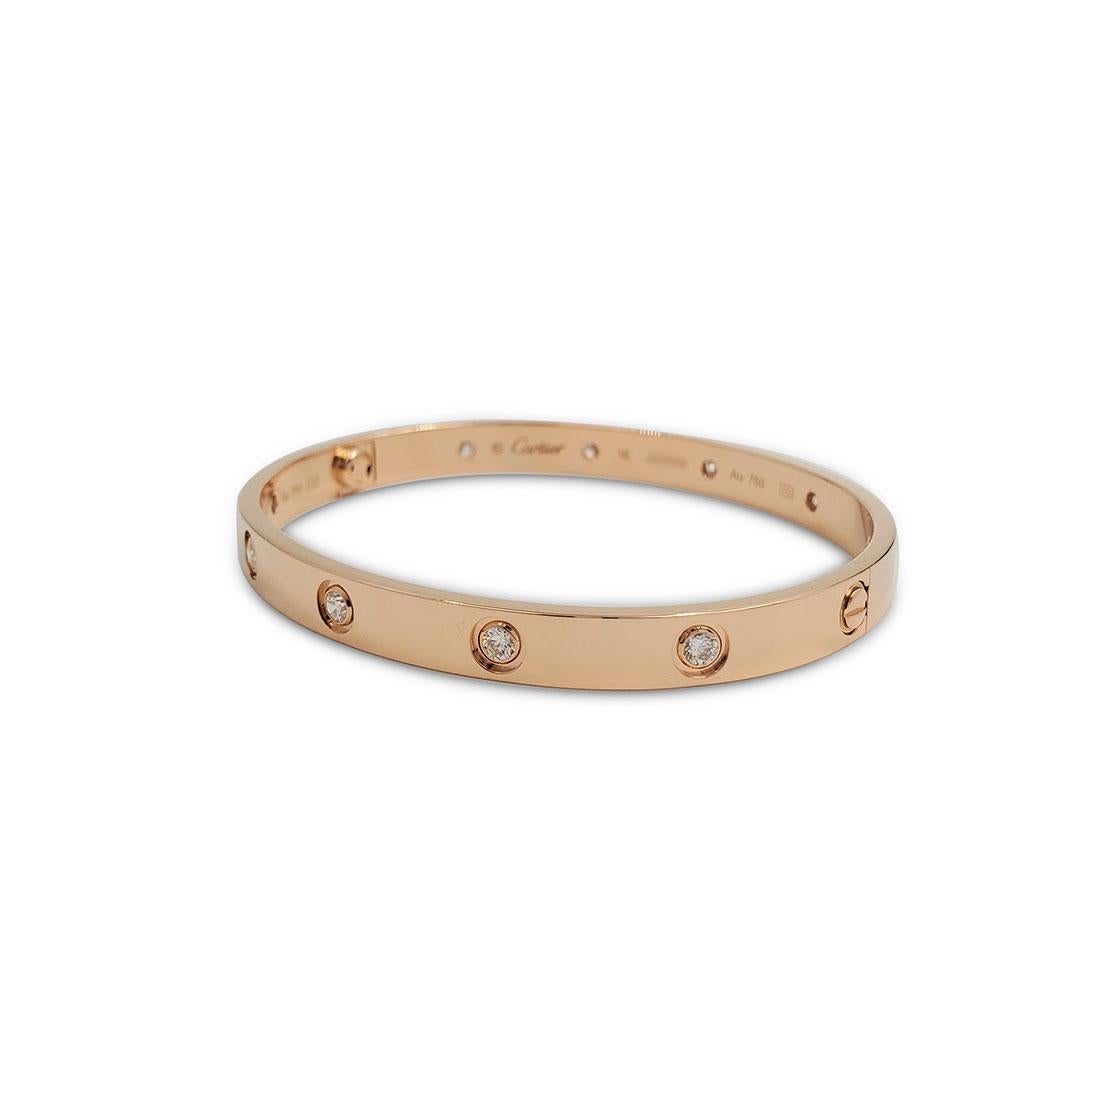 Authentic Cartier 'Love' bangle bracelet crafted in 18 karat rose gold set with ten round brilliant cut diamonds (E-F in color, VS clarity) weighing an estimated 0.96 carats total. Signed Cartier, size 18, Au750, with serial number. The bracelet is